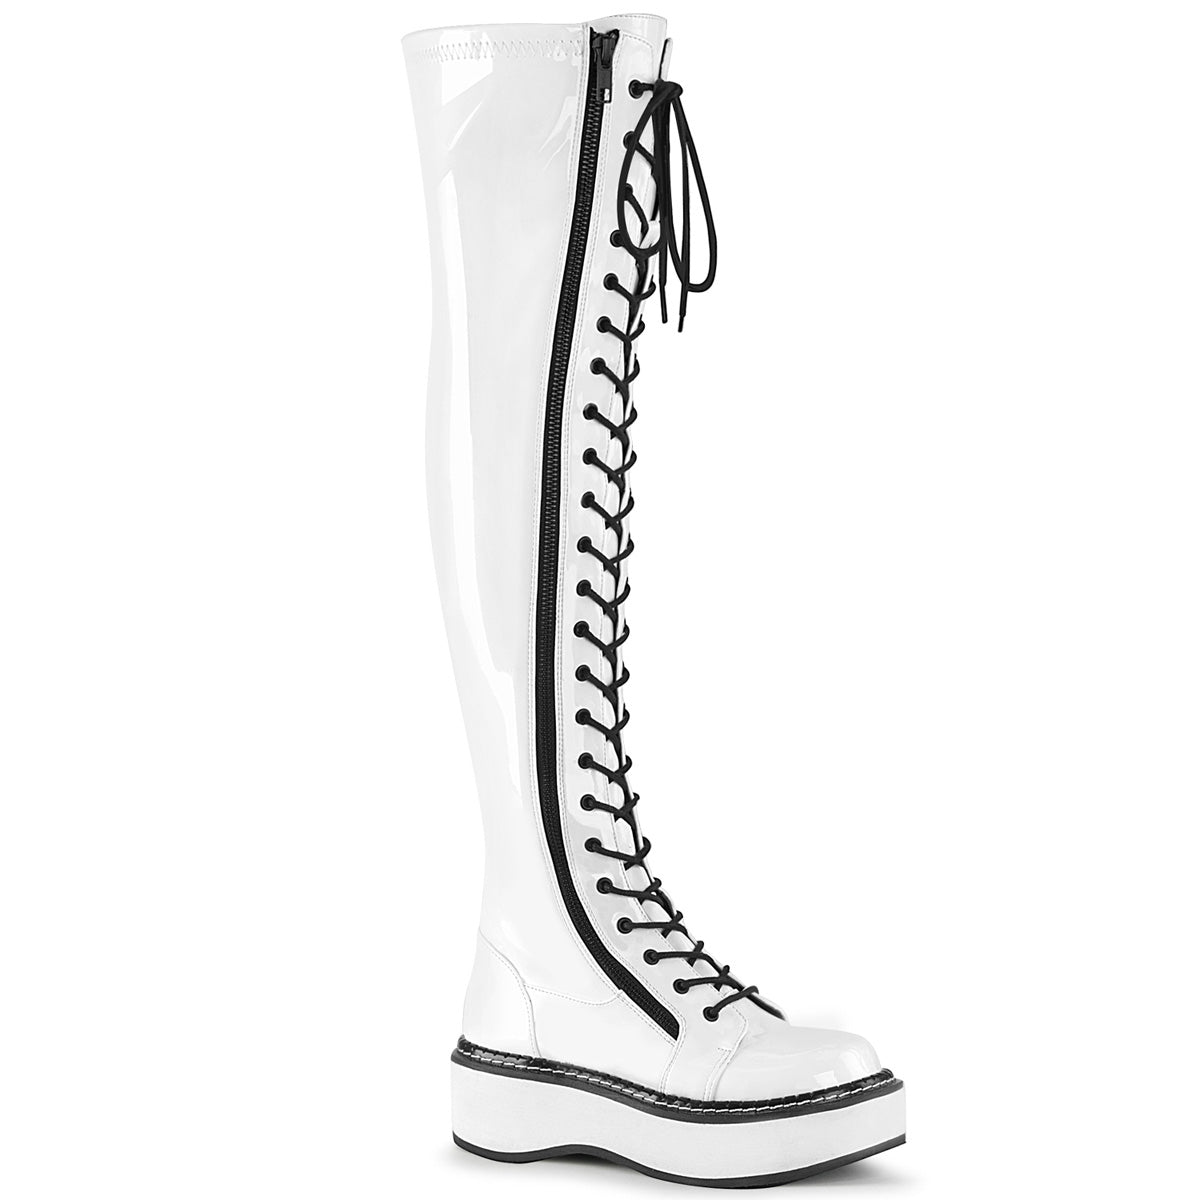 White patent emily over-the-knee 2" platform boots.